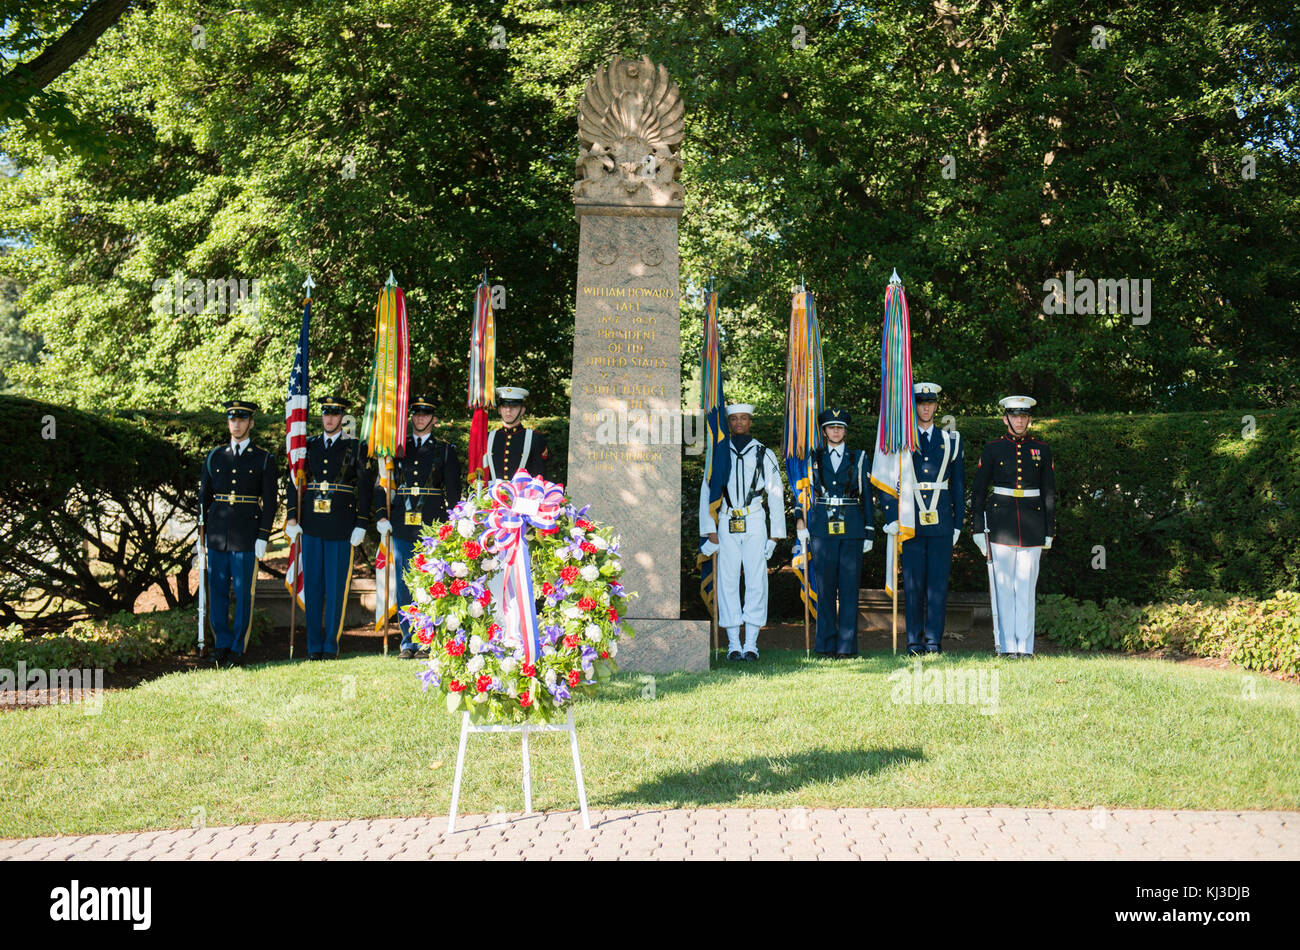 The U.S. Army Military District of Washington conducts a Presidential Armed Forces Full Honor Wreath-Laying Ceremony at the grave of President William H. Taft in Arlington National Cemetery to celebrate his 158th birt 0099 Stock Photo